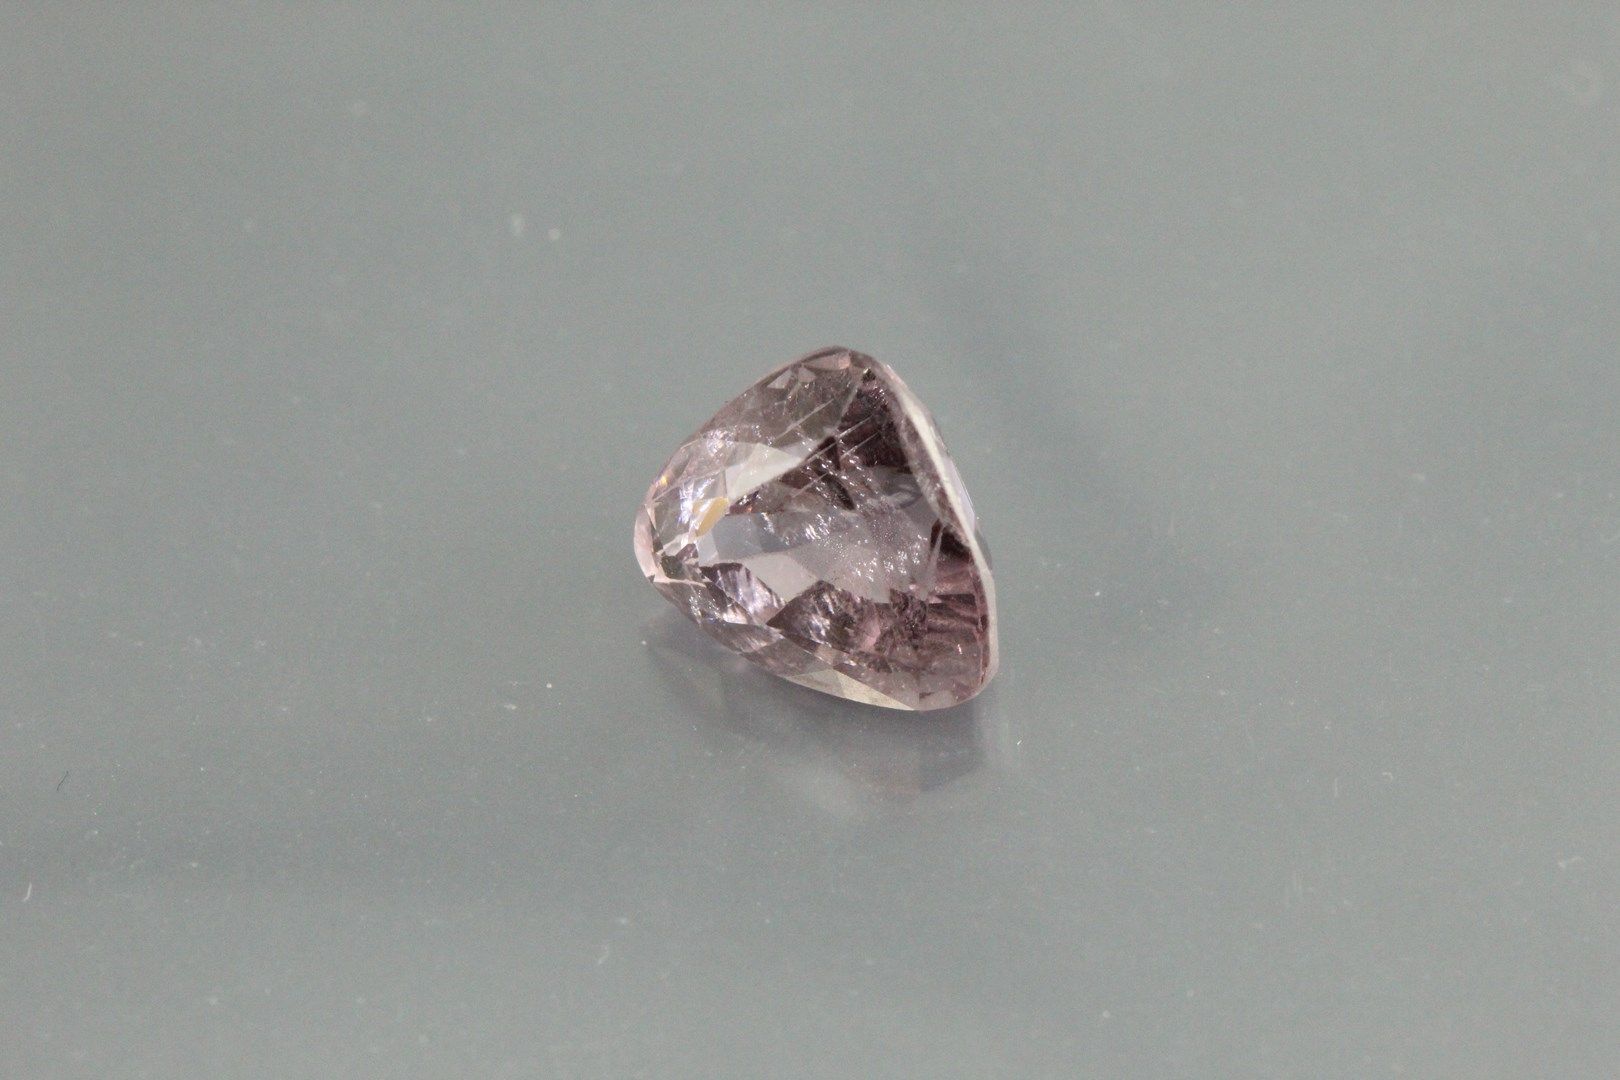 Null Spinel trillion on paper.

Weight : 3,75 cts. 

Plan of separation.